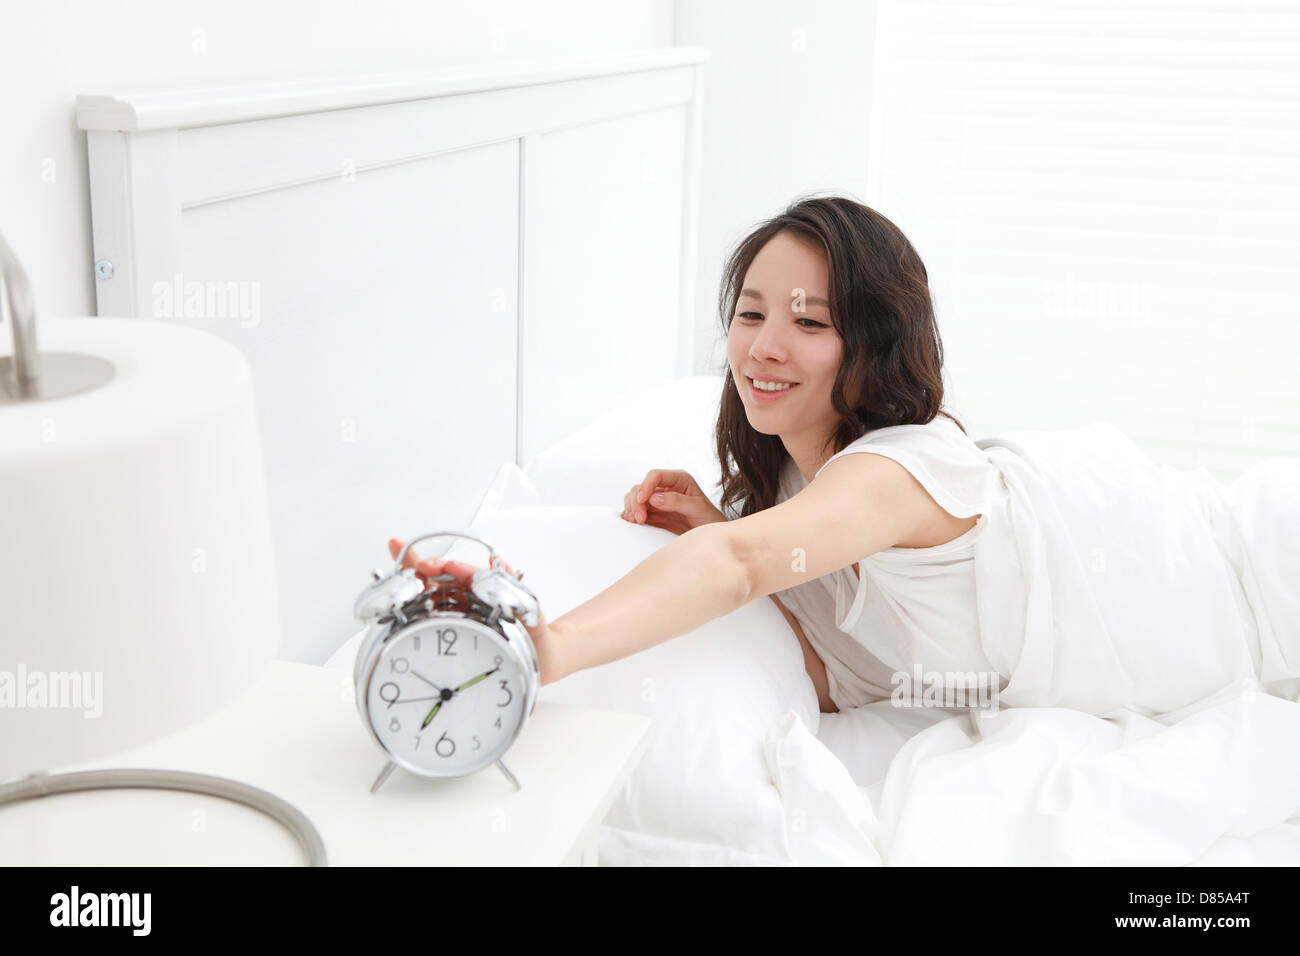 young woman turing off alarm clock. Stock Photo